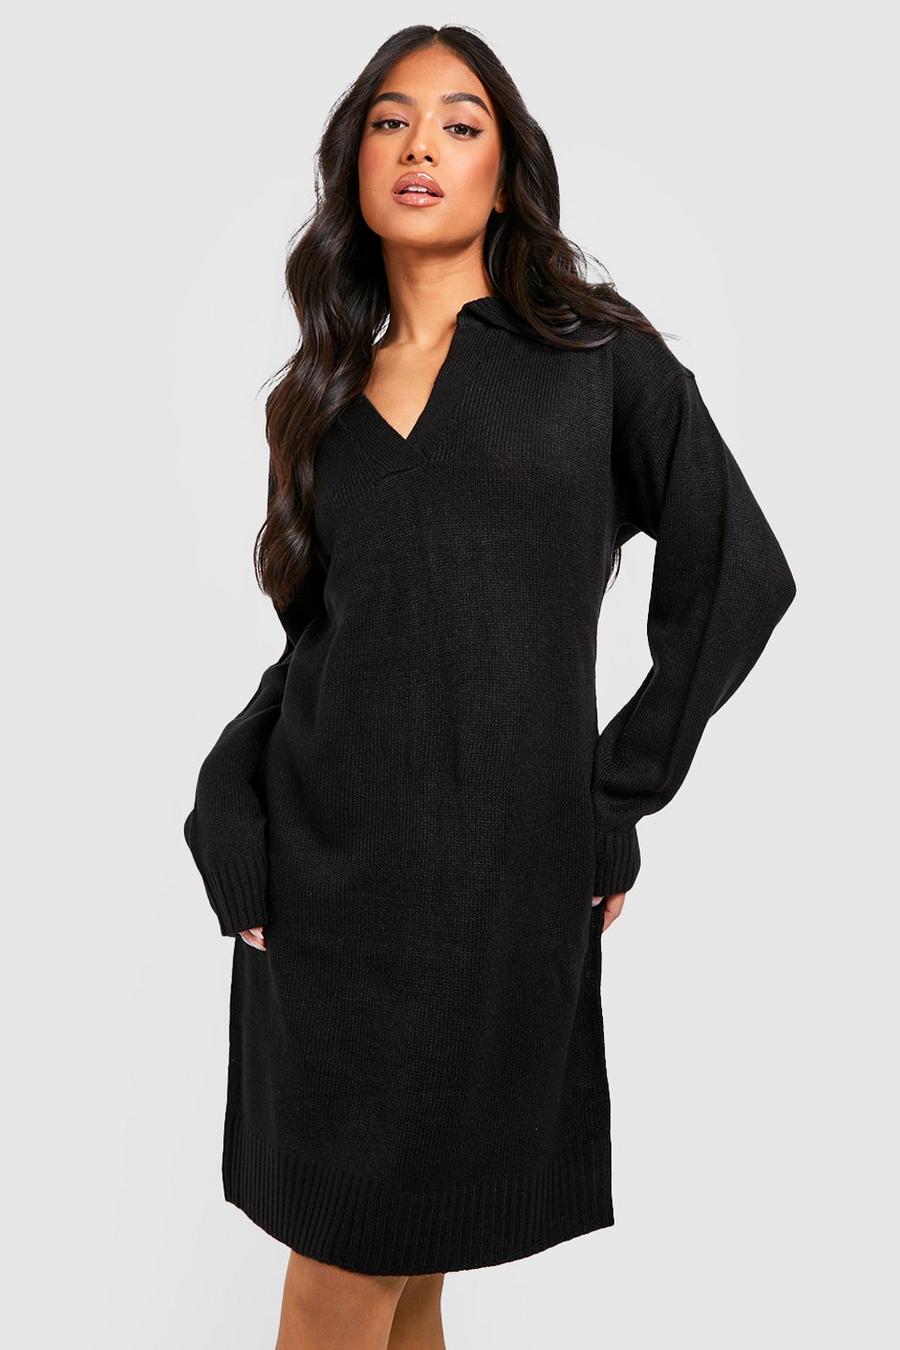 Black Petite Knitted Collared Jumper Dress